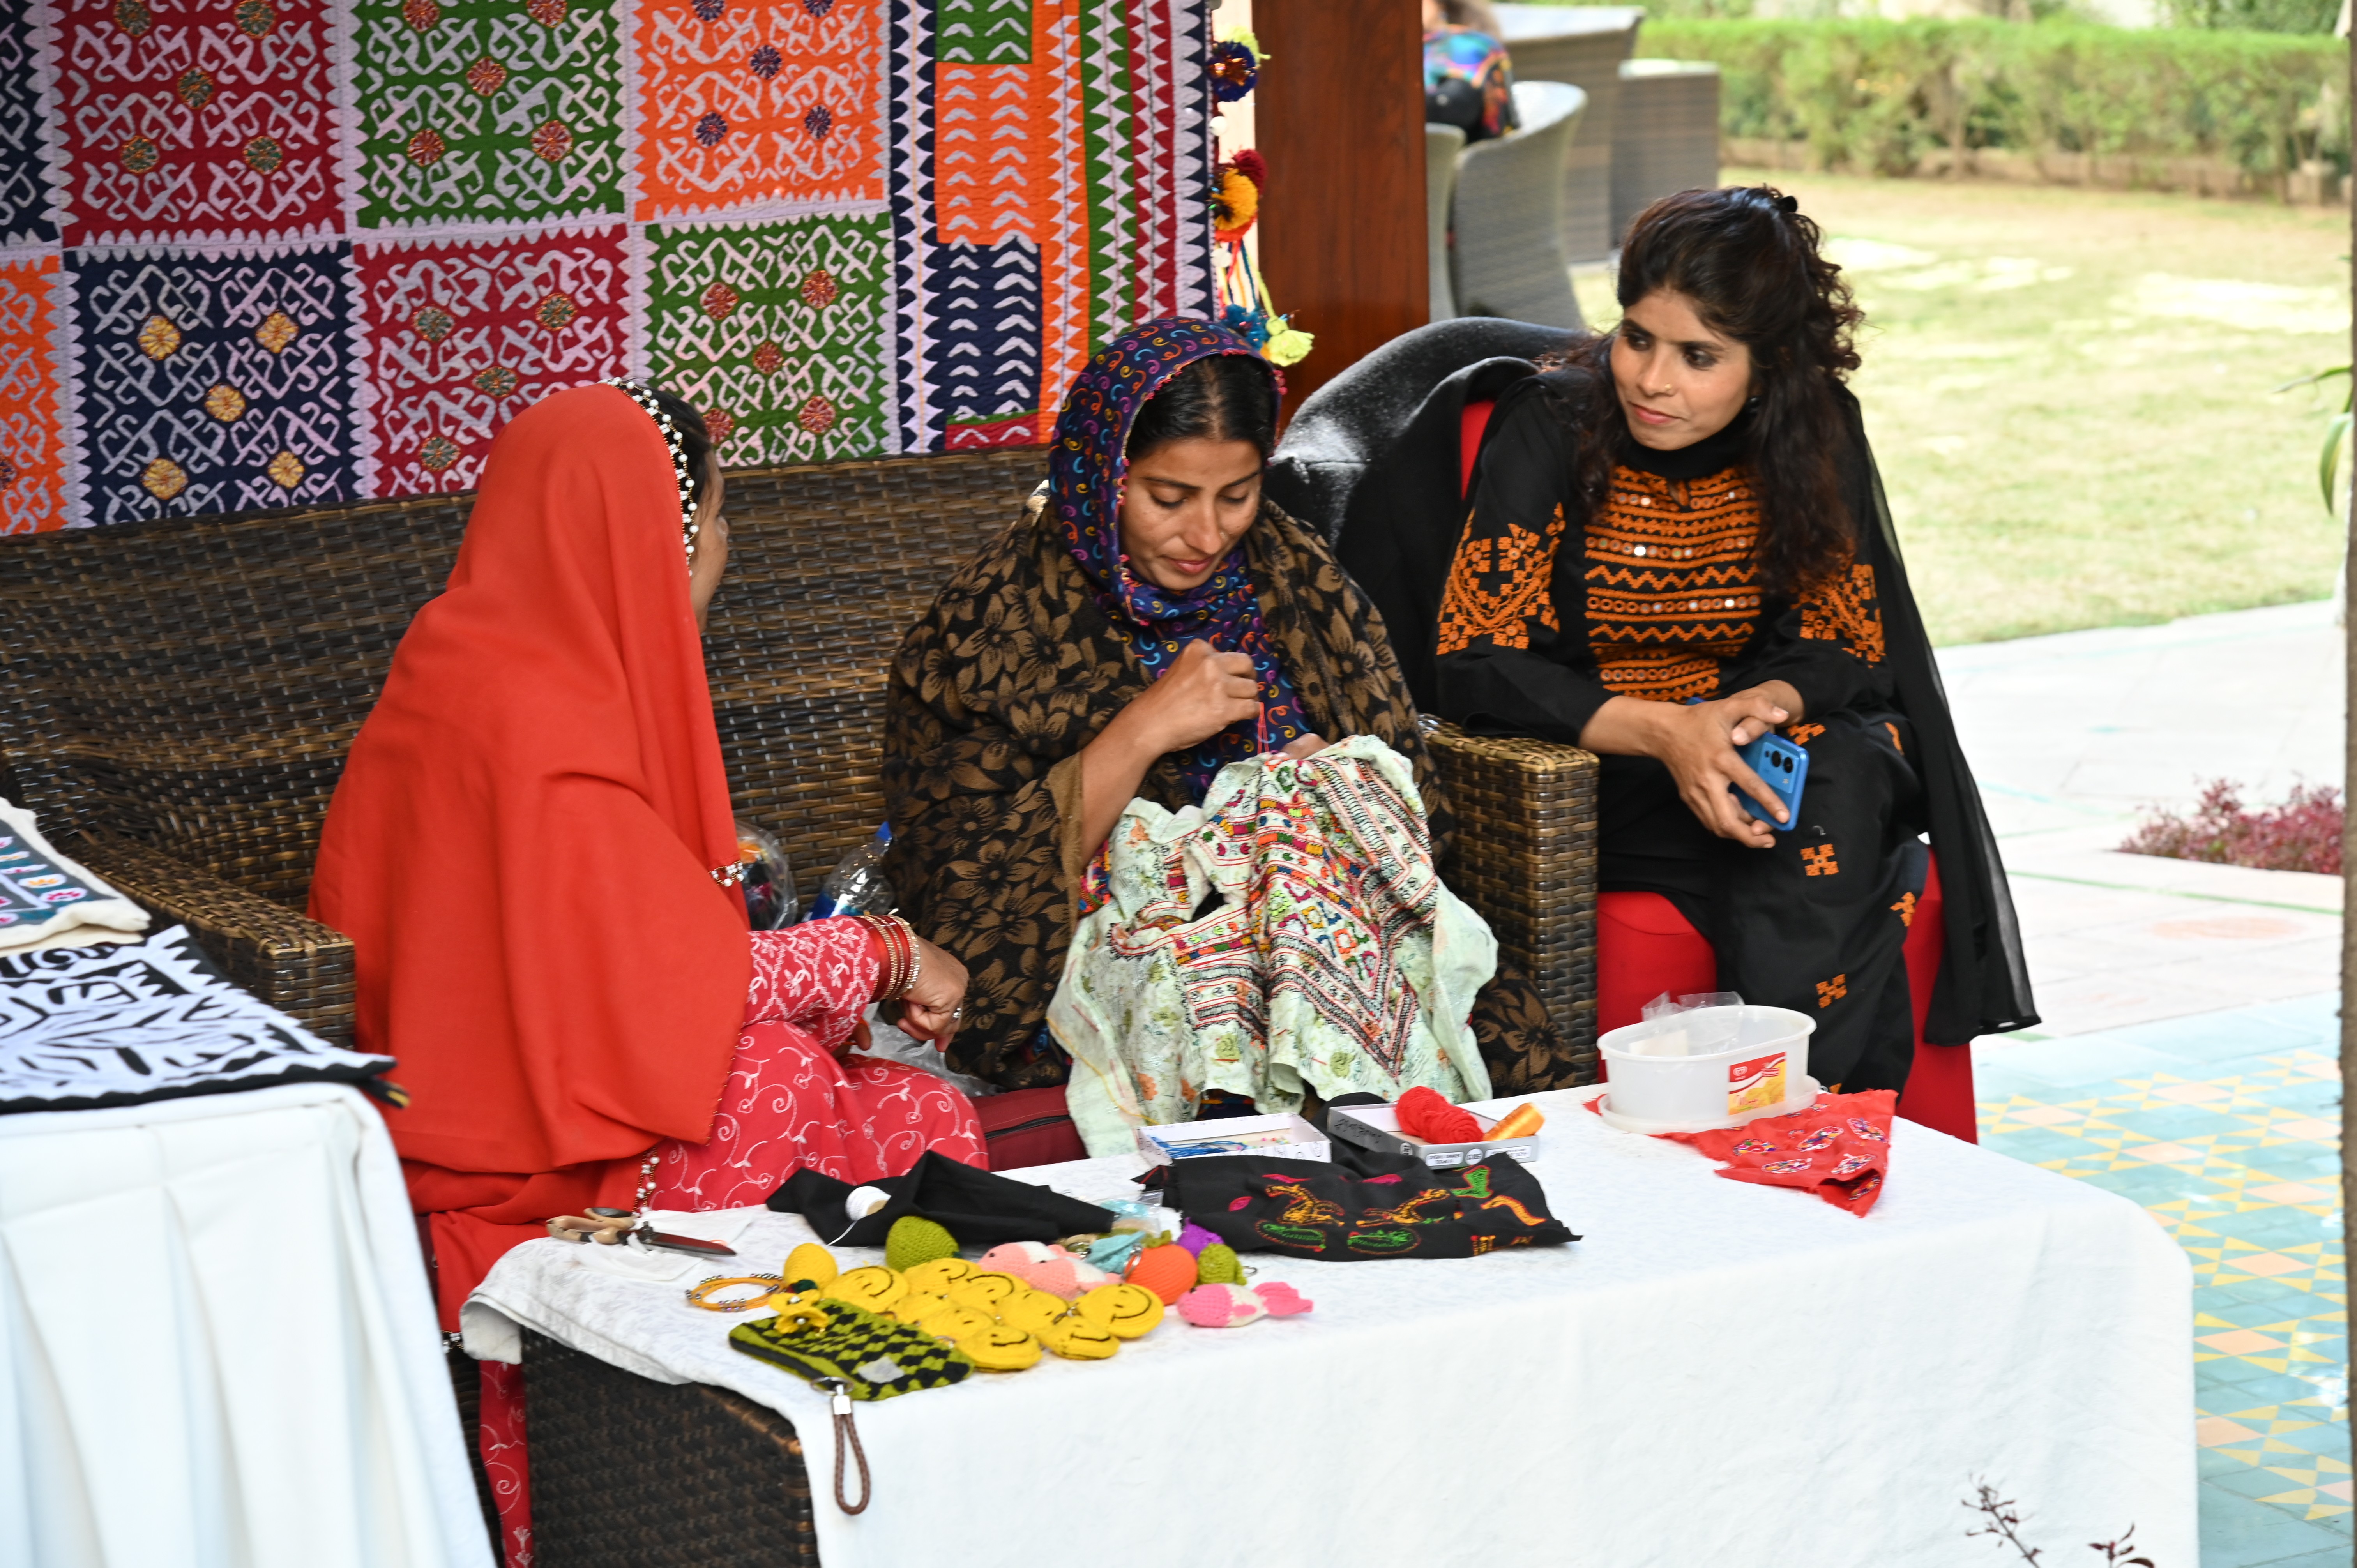 The young girls busy with embroidery work